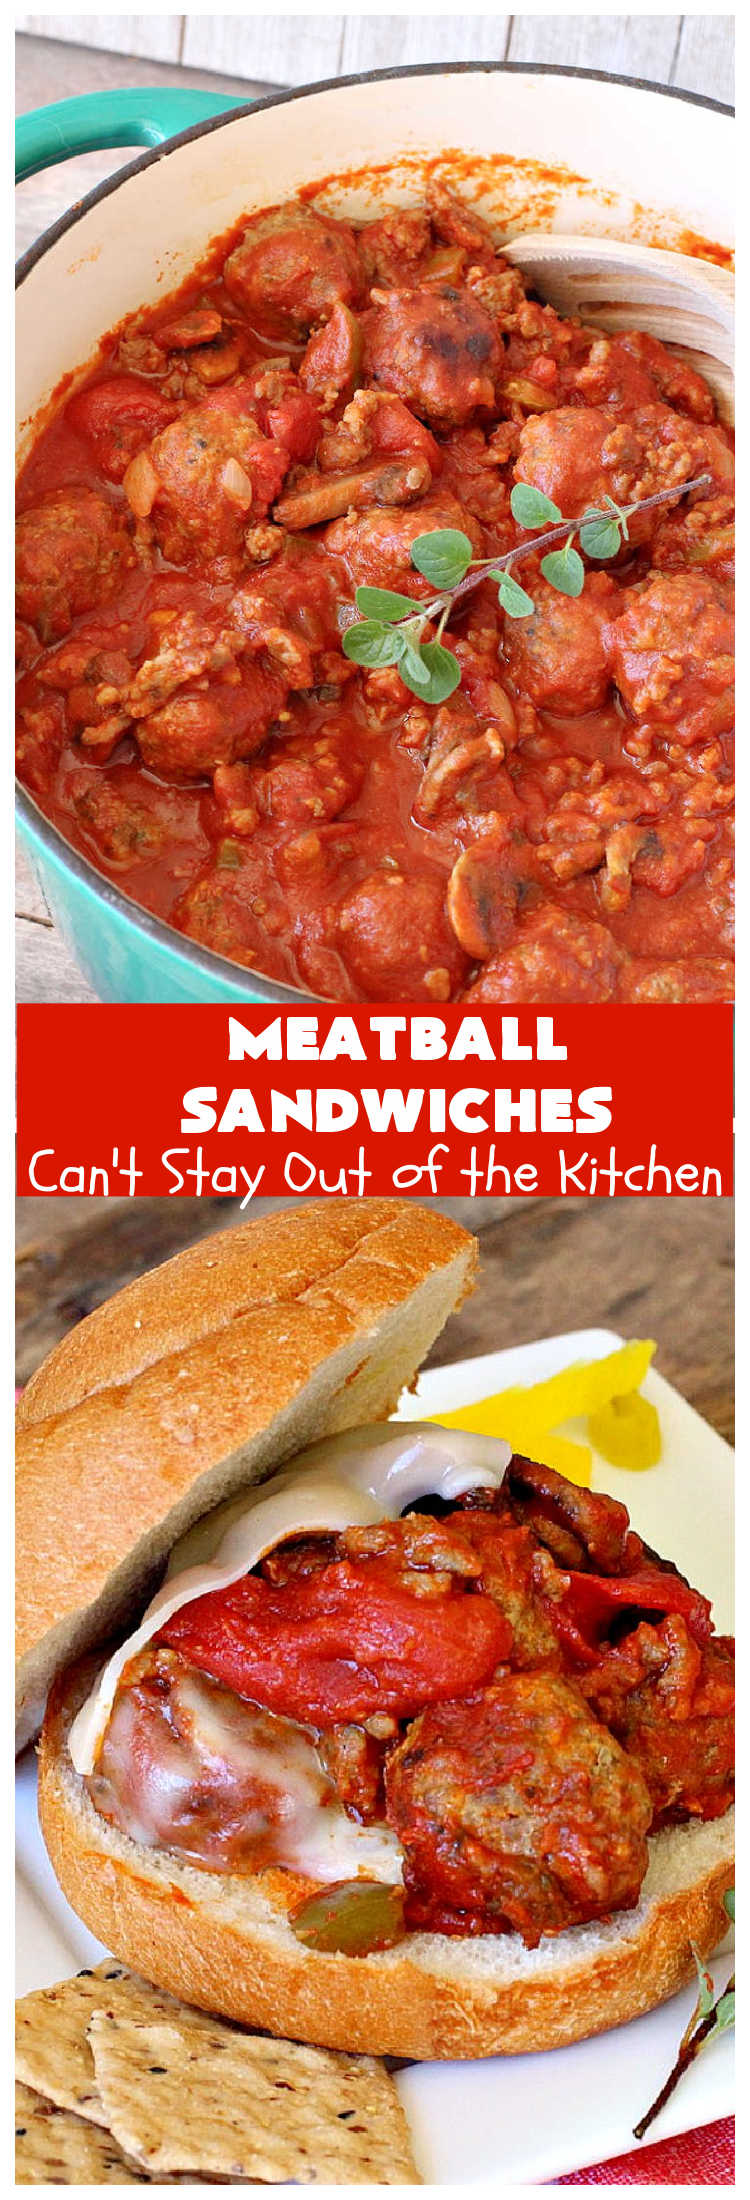 Meatball Sandwiches | Can't Stay Out of the Kitchen | Amazing #meatballs & sauce to spread over hoagie rolls. Adding melted #ProvoloneCheese makes them spectacular. Great for #tailgating parties. So  easy for weekend dinners. #beef #sandwiches #MarinaraSauce #ItalianSausage #MeatballSandwiches 